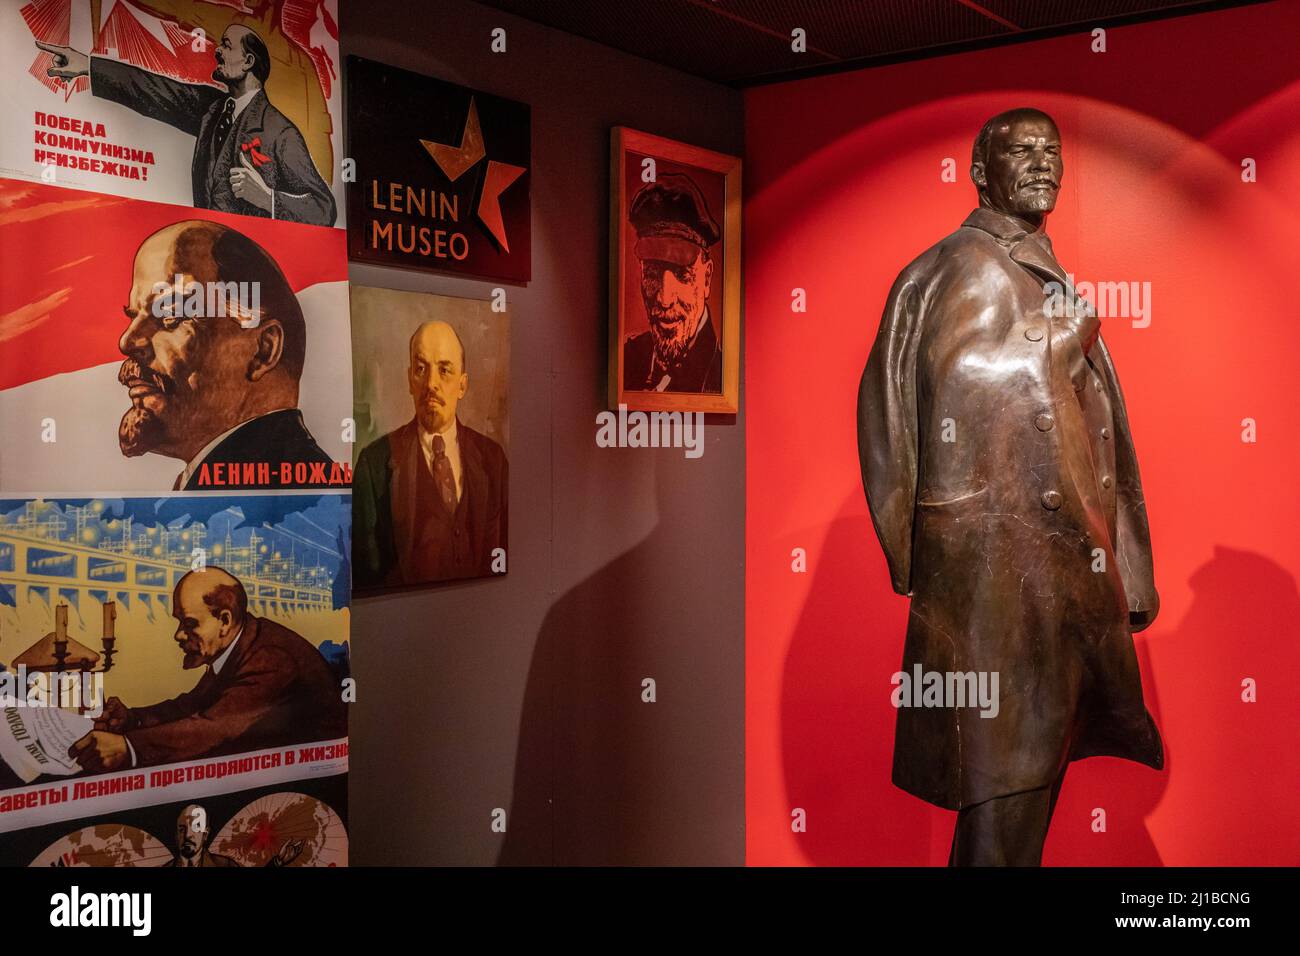 REPRESENTATION OF LENIN, LENIN MUSEUM IN THE TAMPERE WORKERS' HALL WHERE VLADIMIR ILITCH LENINE AND JOSEPH STALIN SECRETLY MET IN 1905, KAAKINMAA QUARTER, TAMPERE, FINLAND, EUROPE Stock Photo